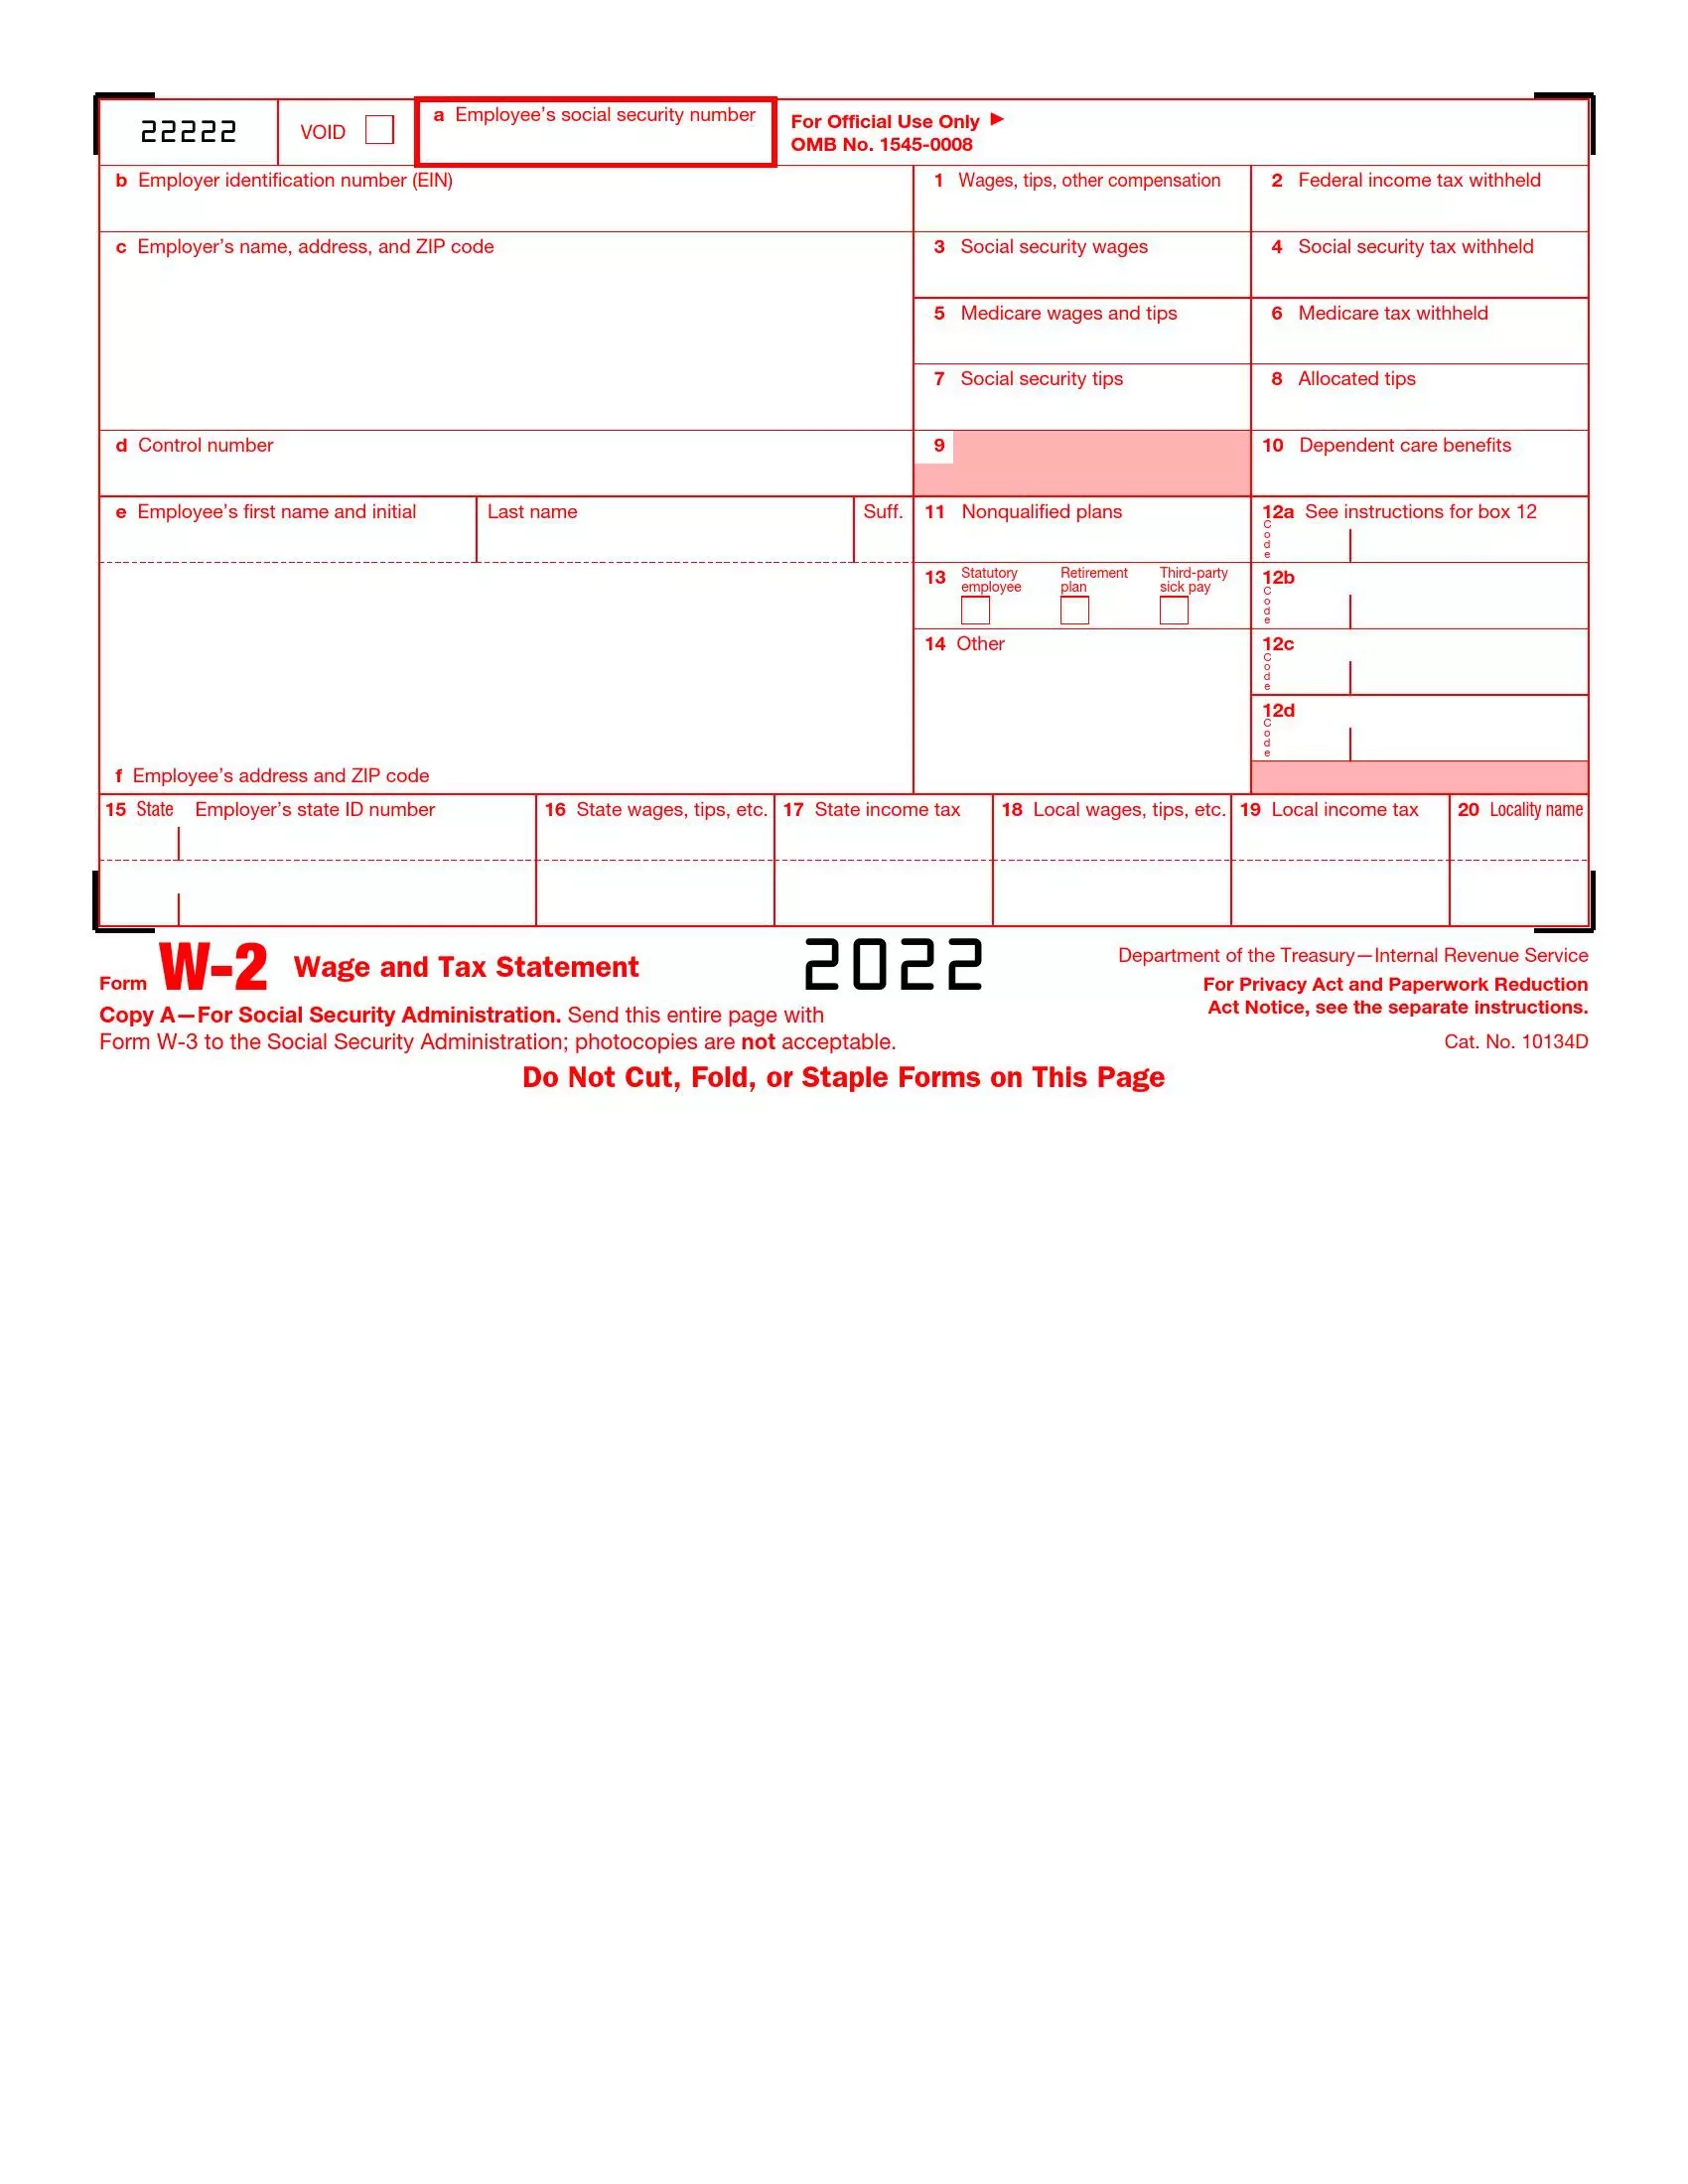 Irs Form W-2 ≡ Fill Out Printable Pdf Forms Online pertaining to W2 Form Print